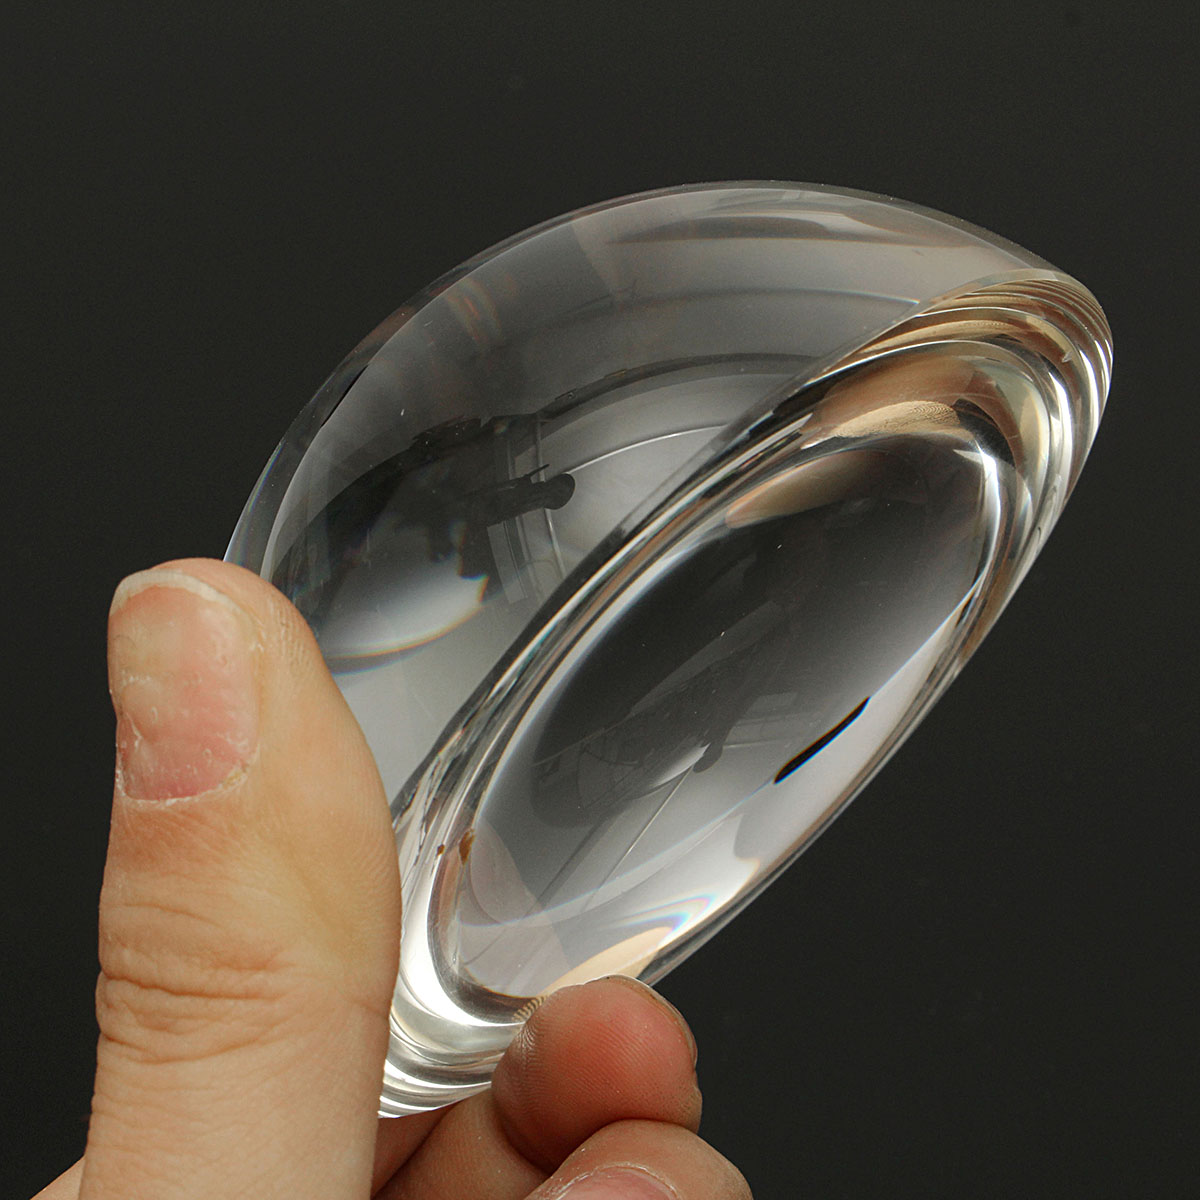 80mm Magnify Paperweight Semi Crystal Ball Magnifier Magnifying Tools